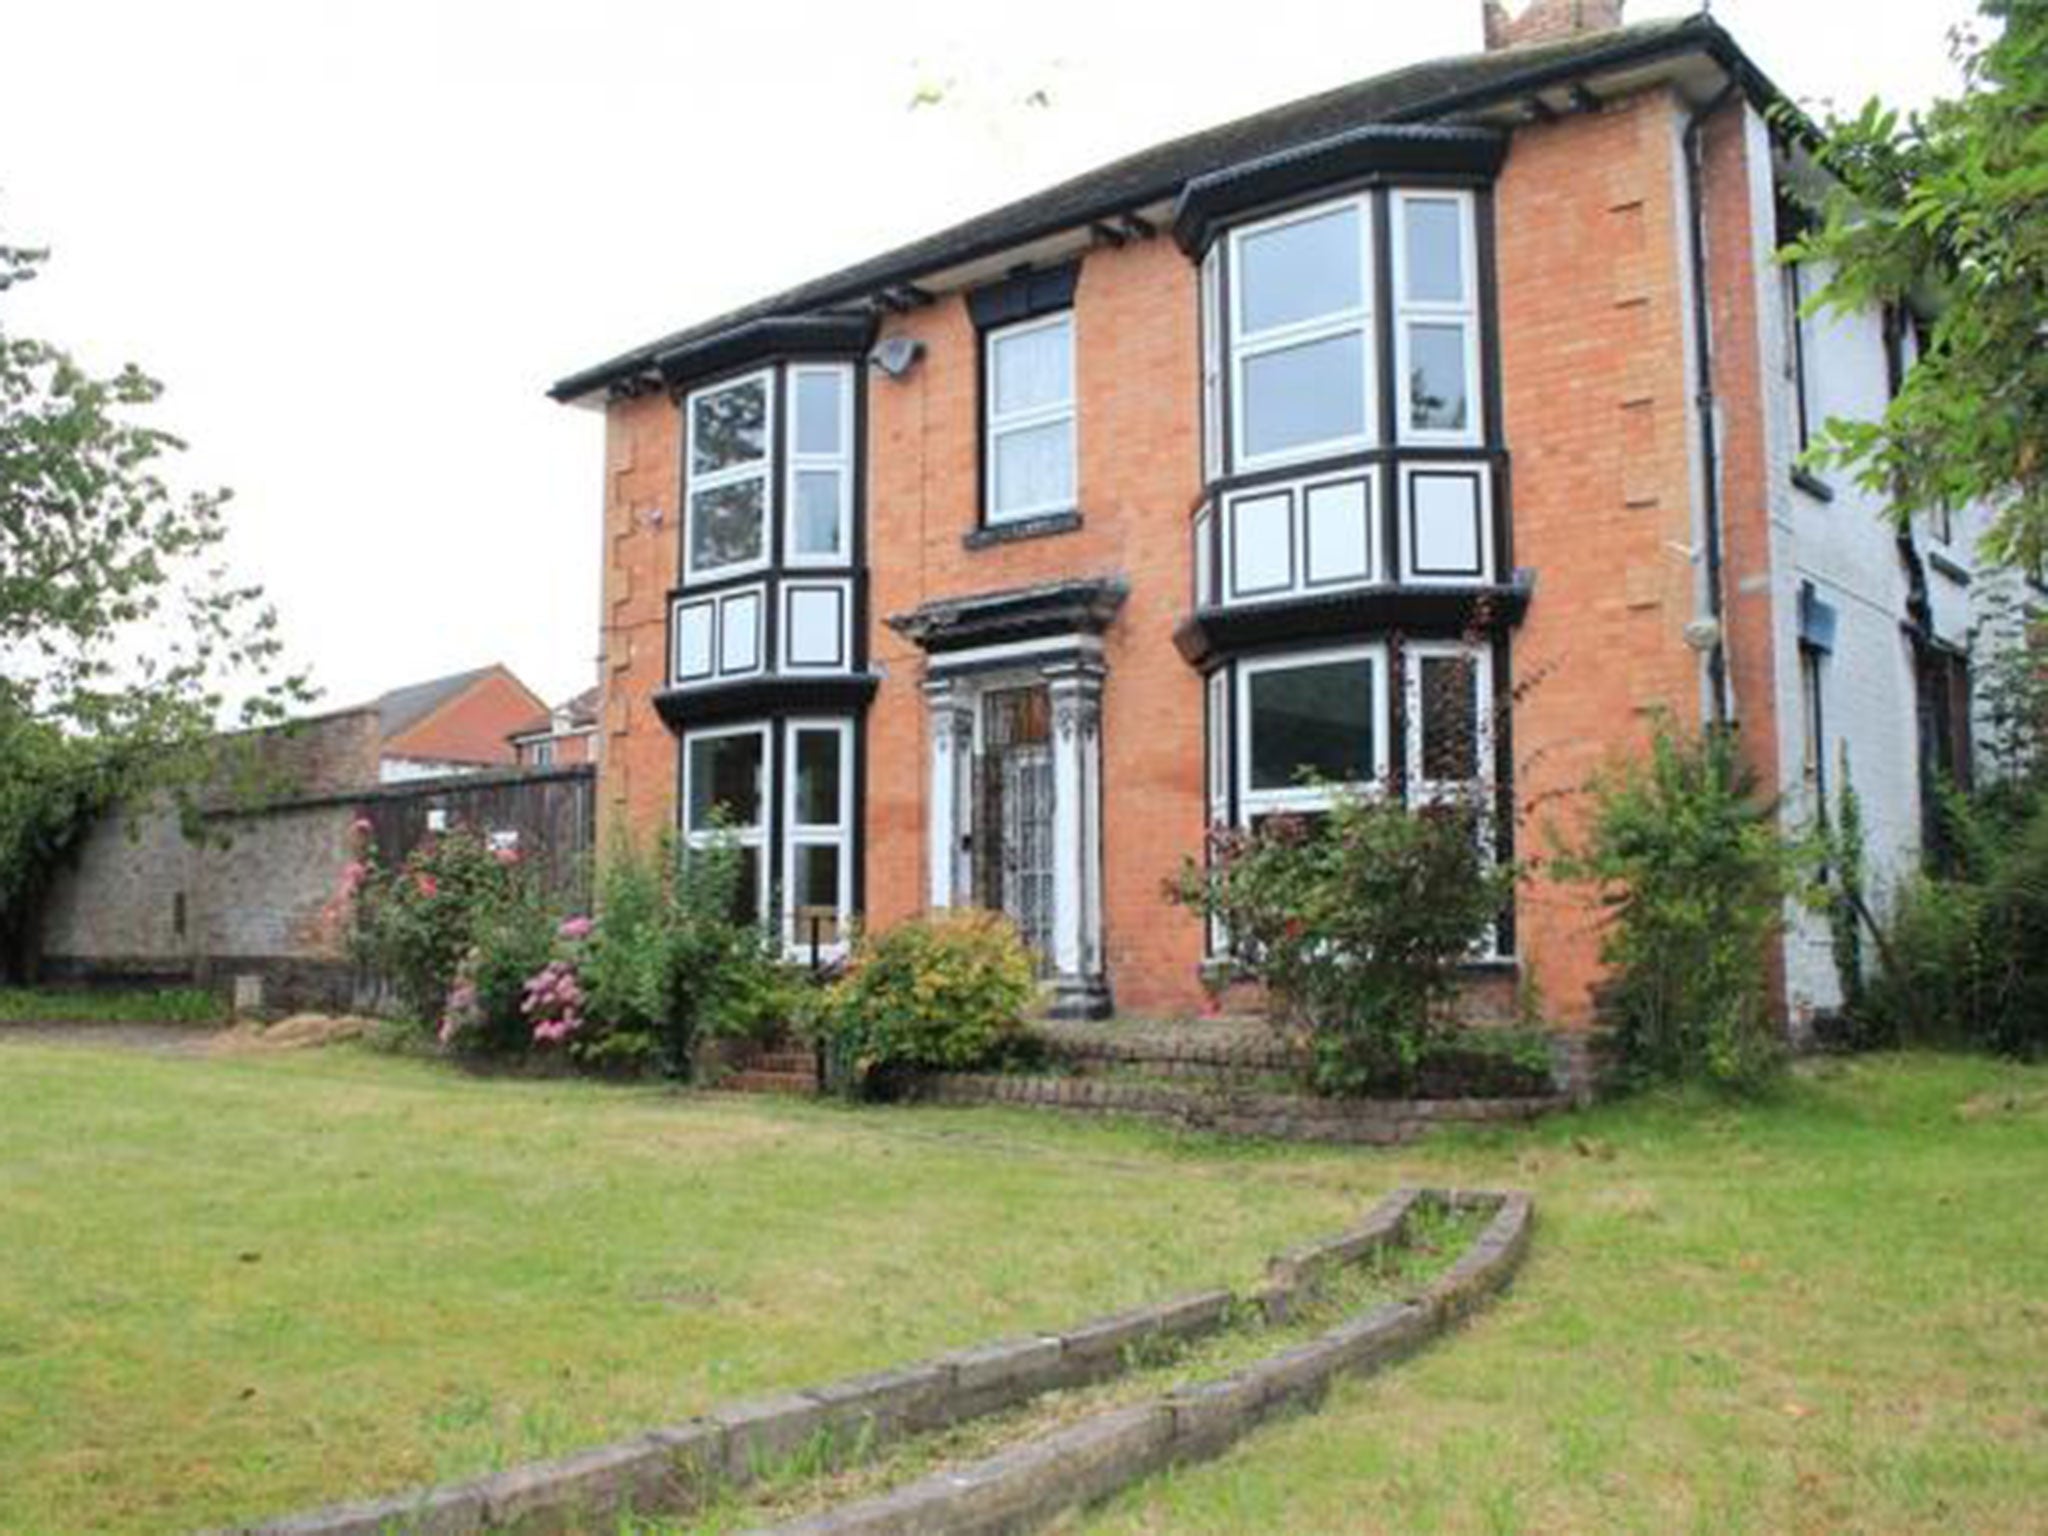 A seven bedroom detached house for sale for £275,000 in Louth, Lincolnshire (Pygott &amp; Crone)